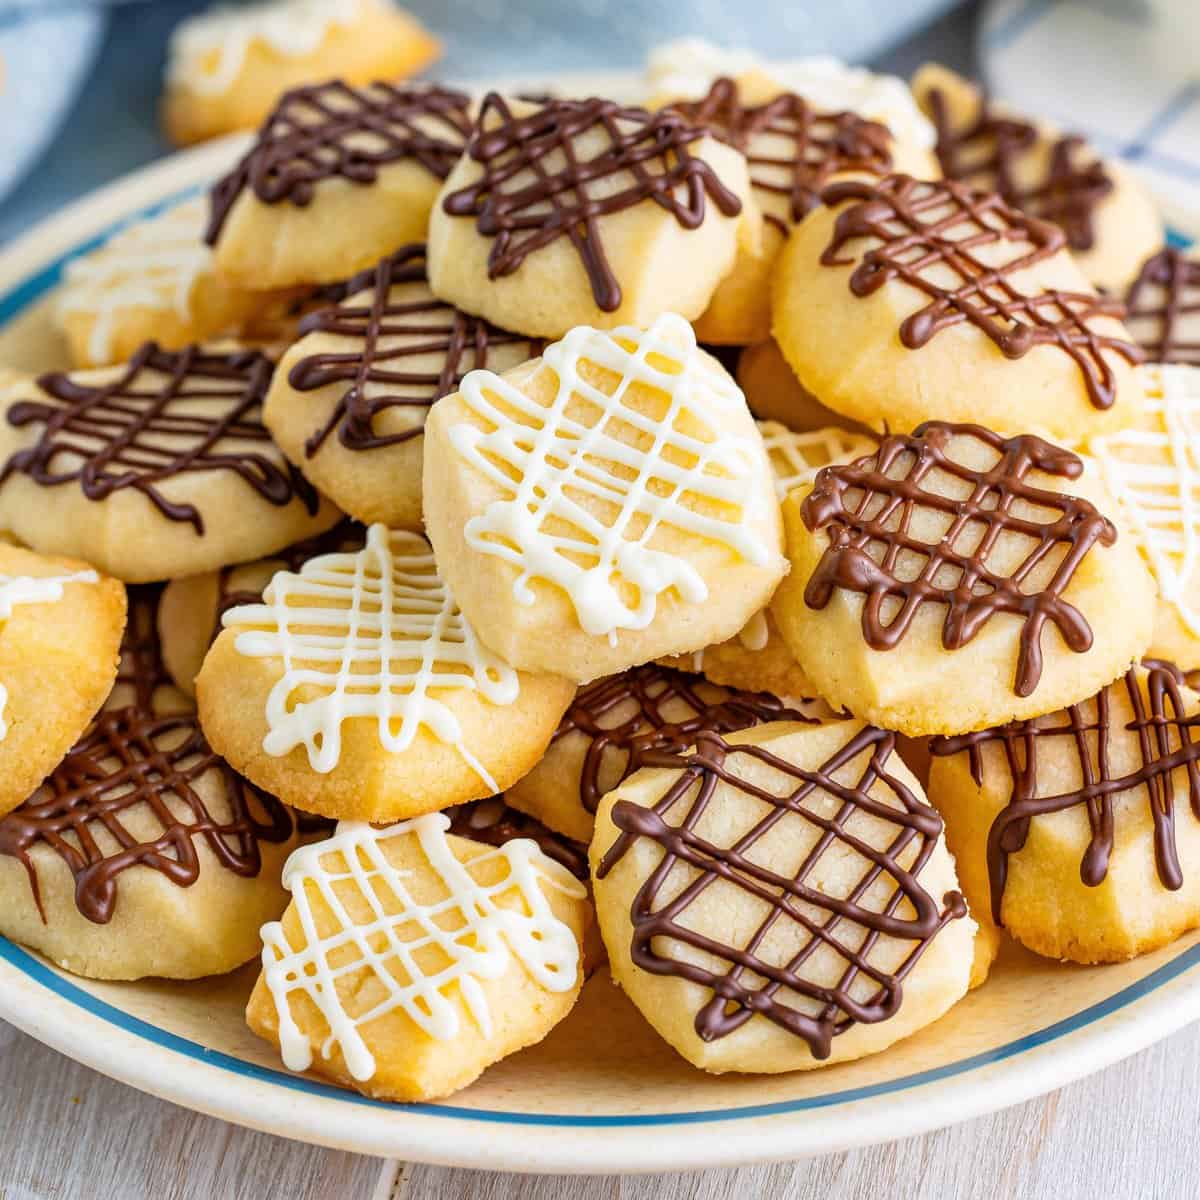 Chocolate Drizzled Shortbread Cookies